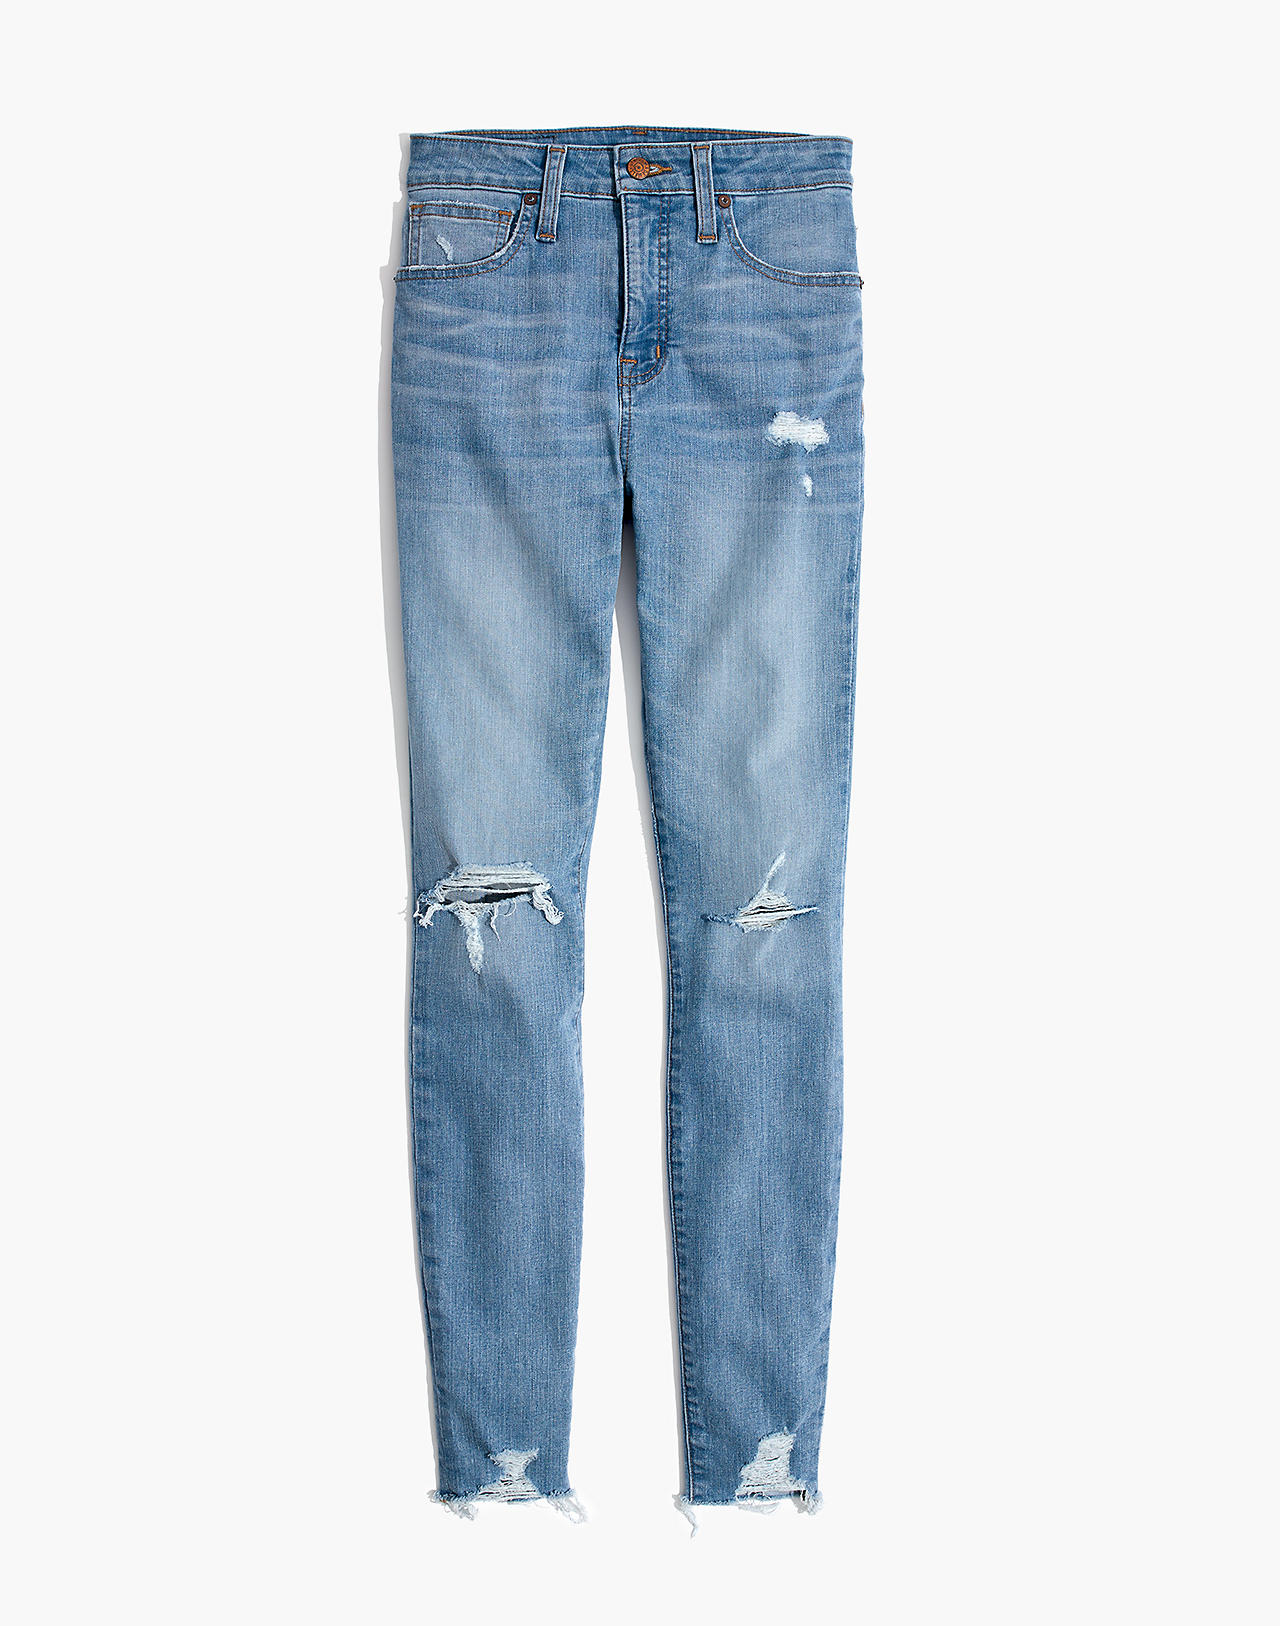 Tall Curvy High-Rise Skinny Jeans in Ontario: Distressed-Hem Edition